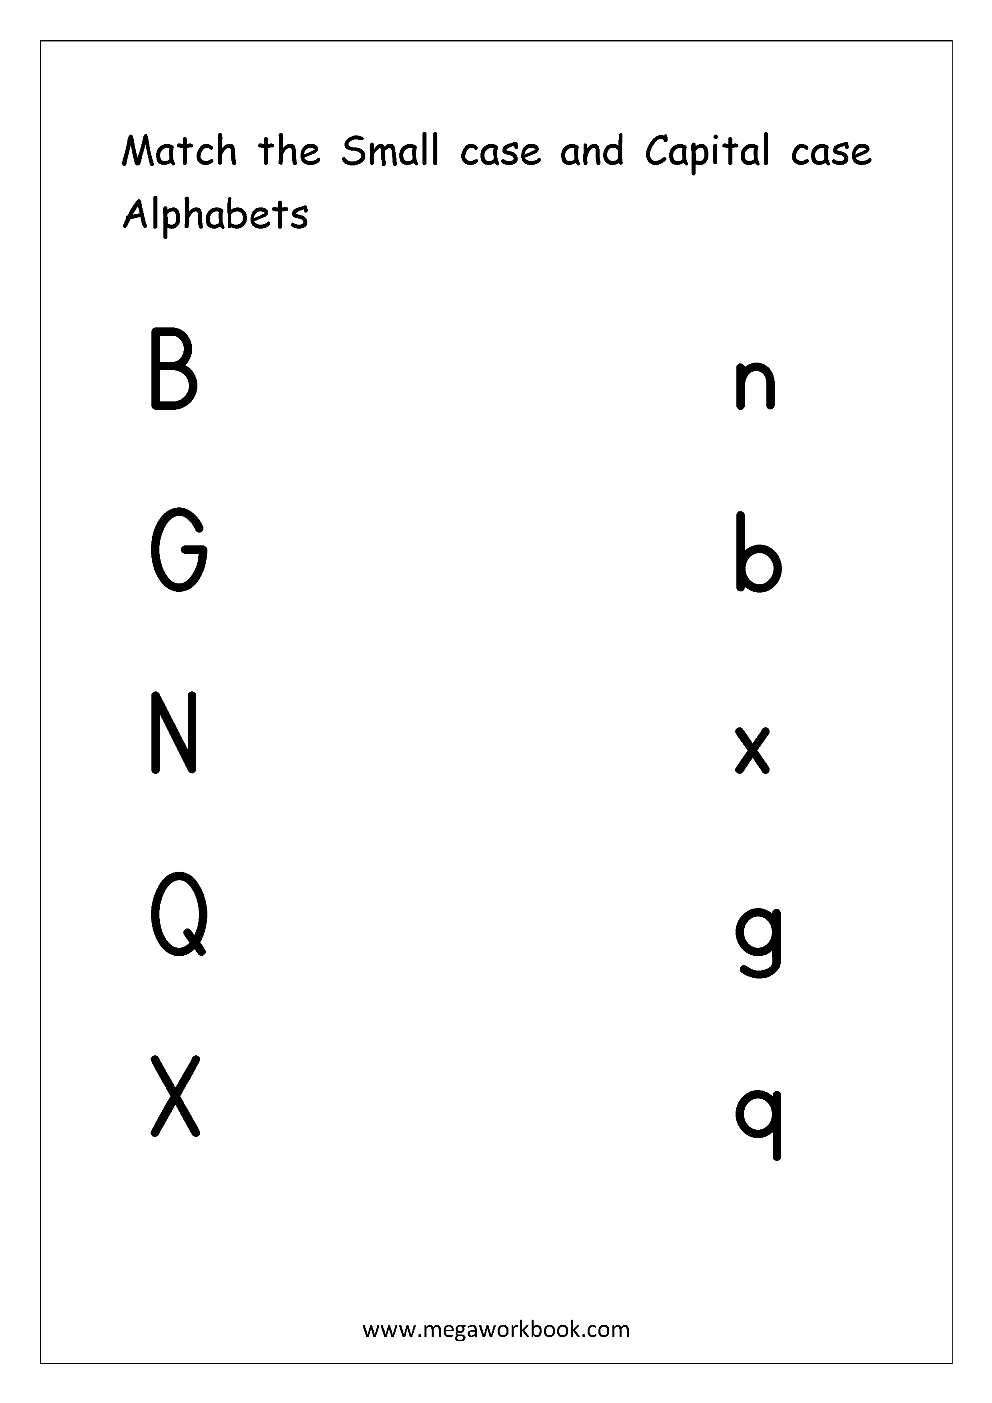 English Worksheet - Match Small And Capital Letters for Letter Matching Worksheets